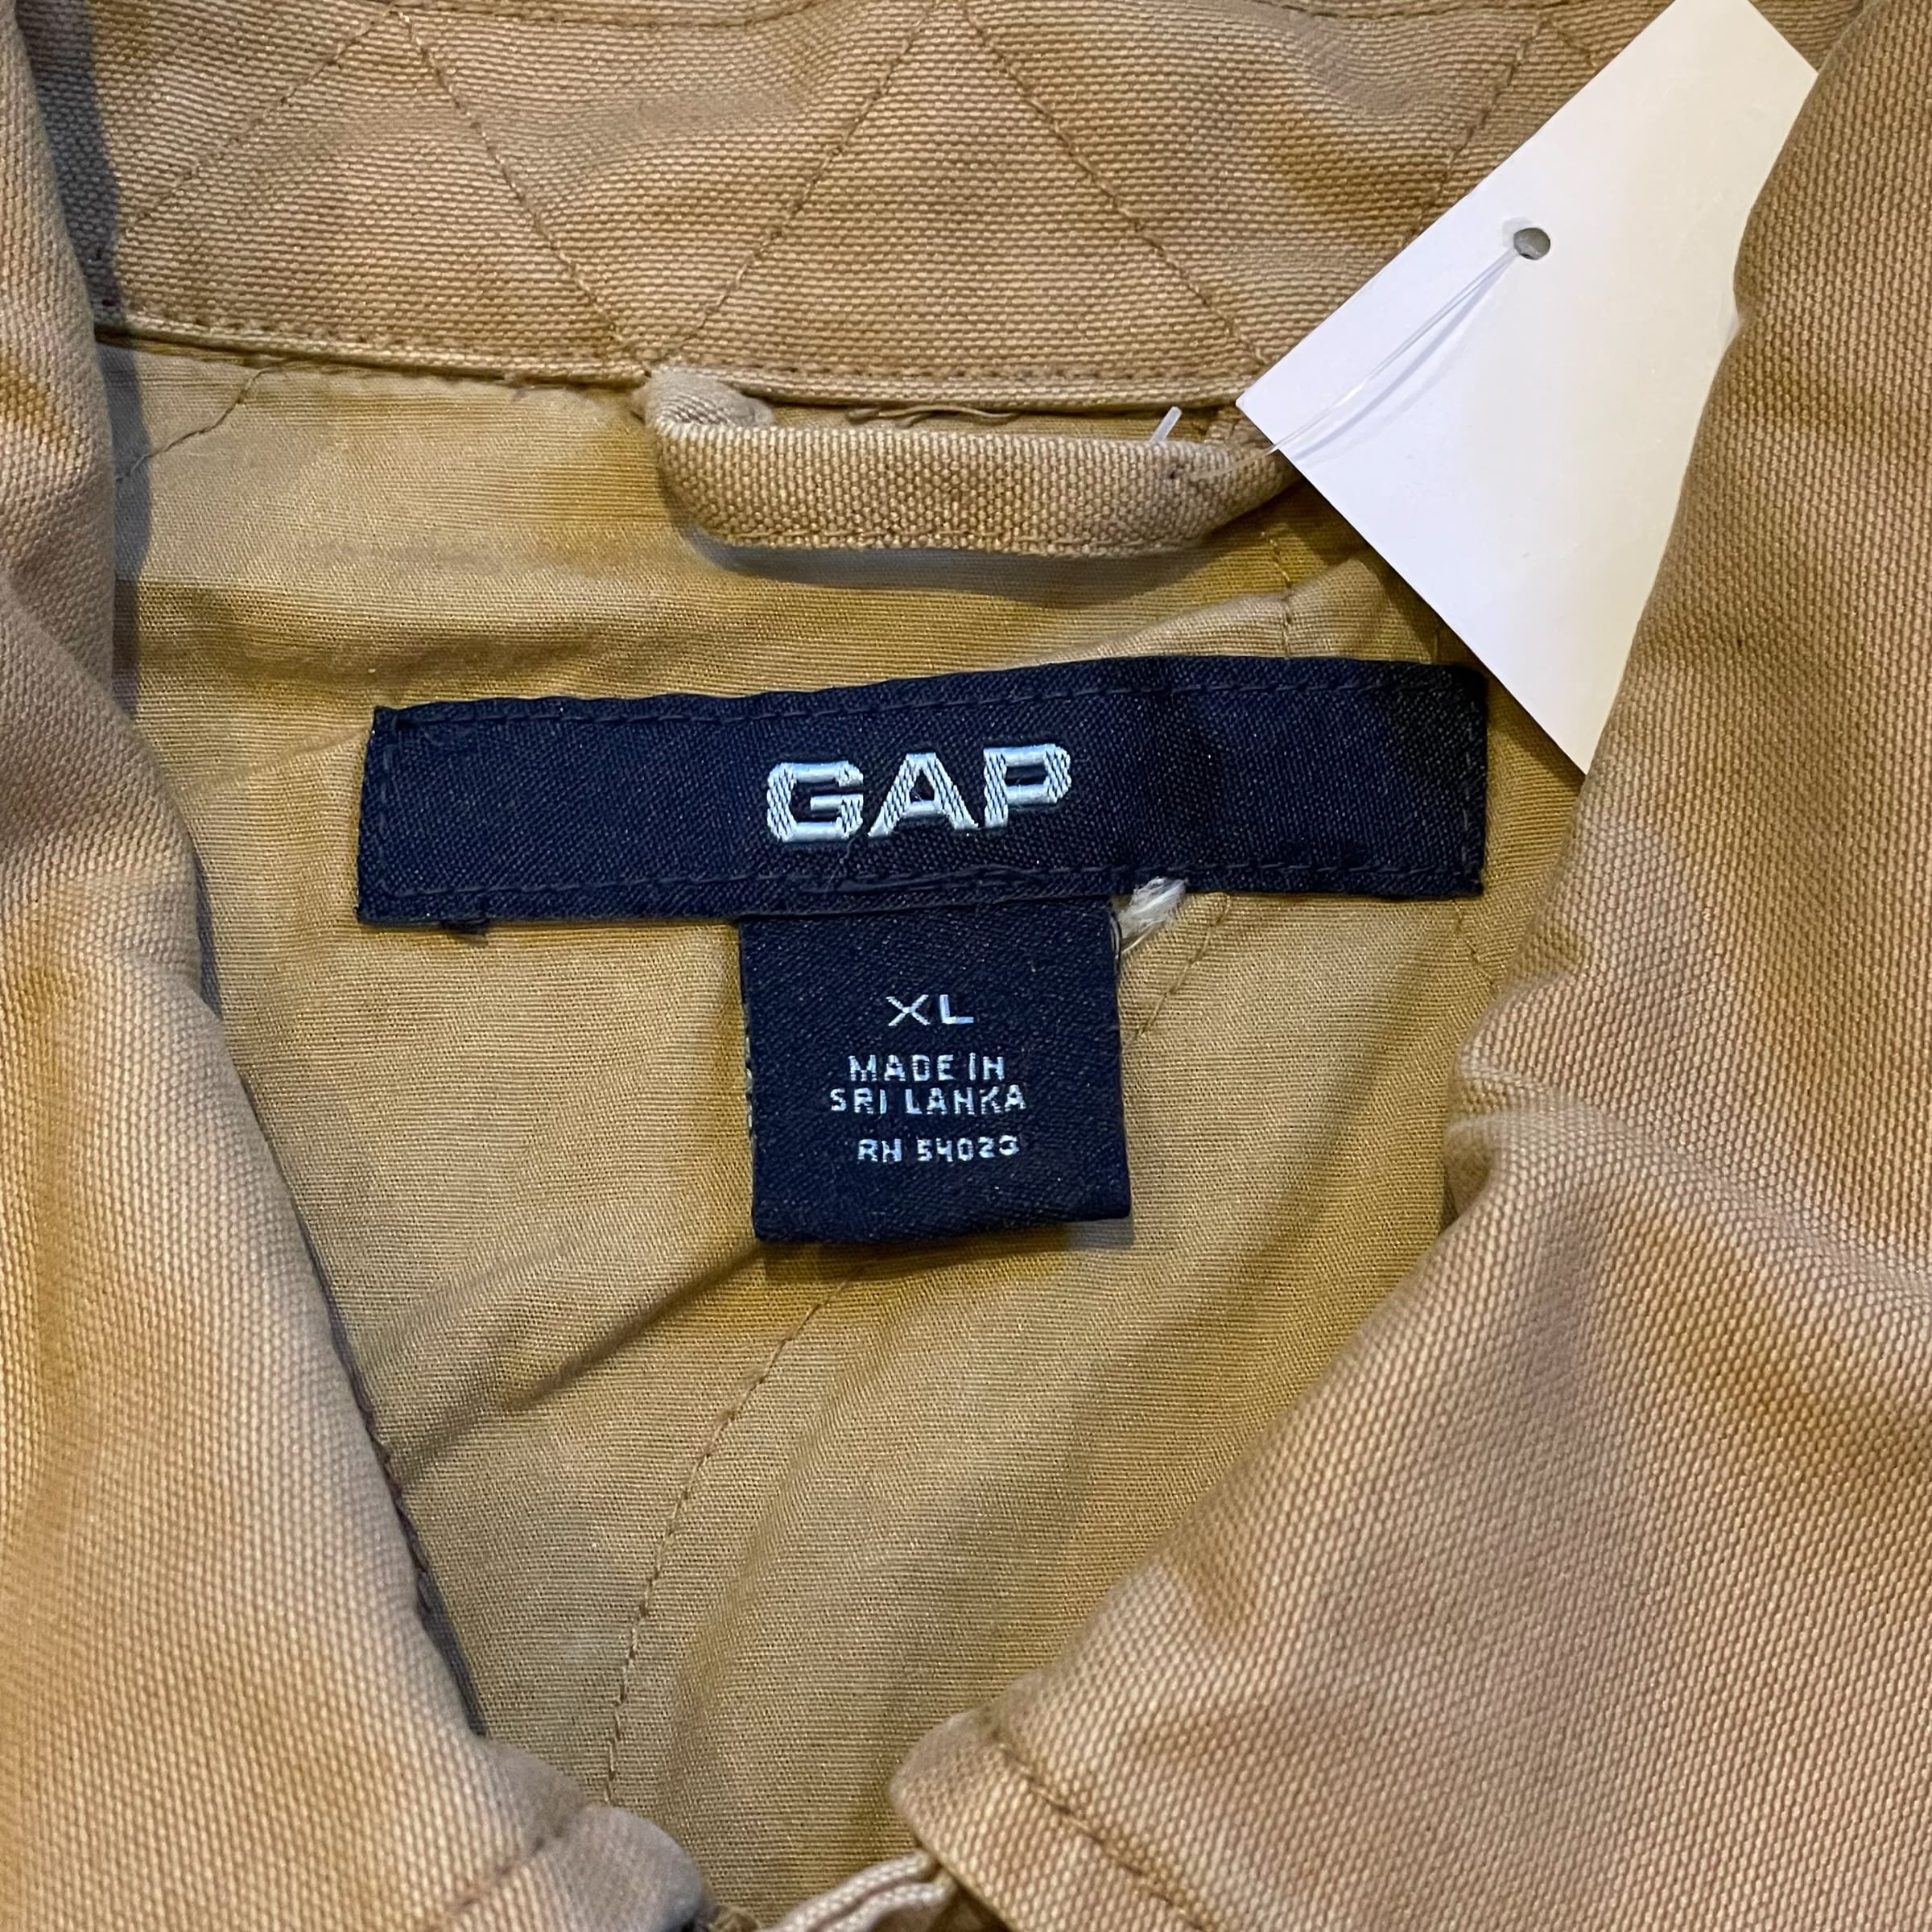 00s GAP A-2 type deck jacket | What’z up powered by BASE